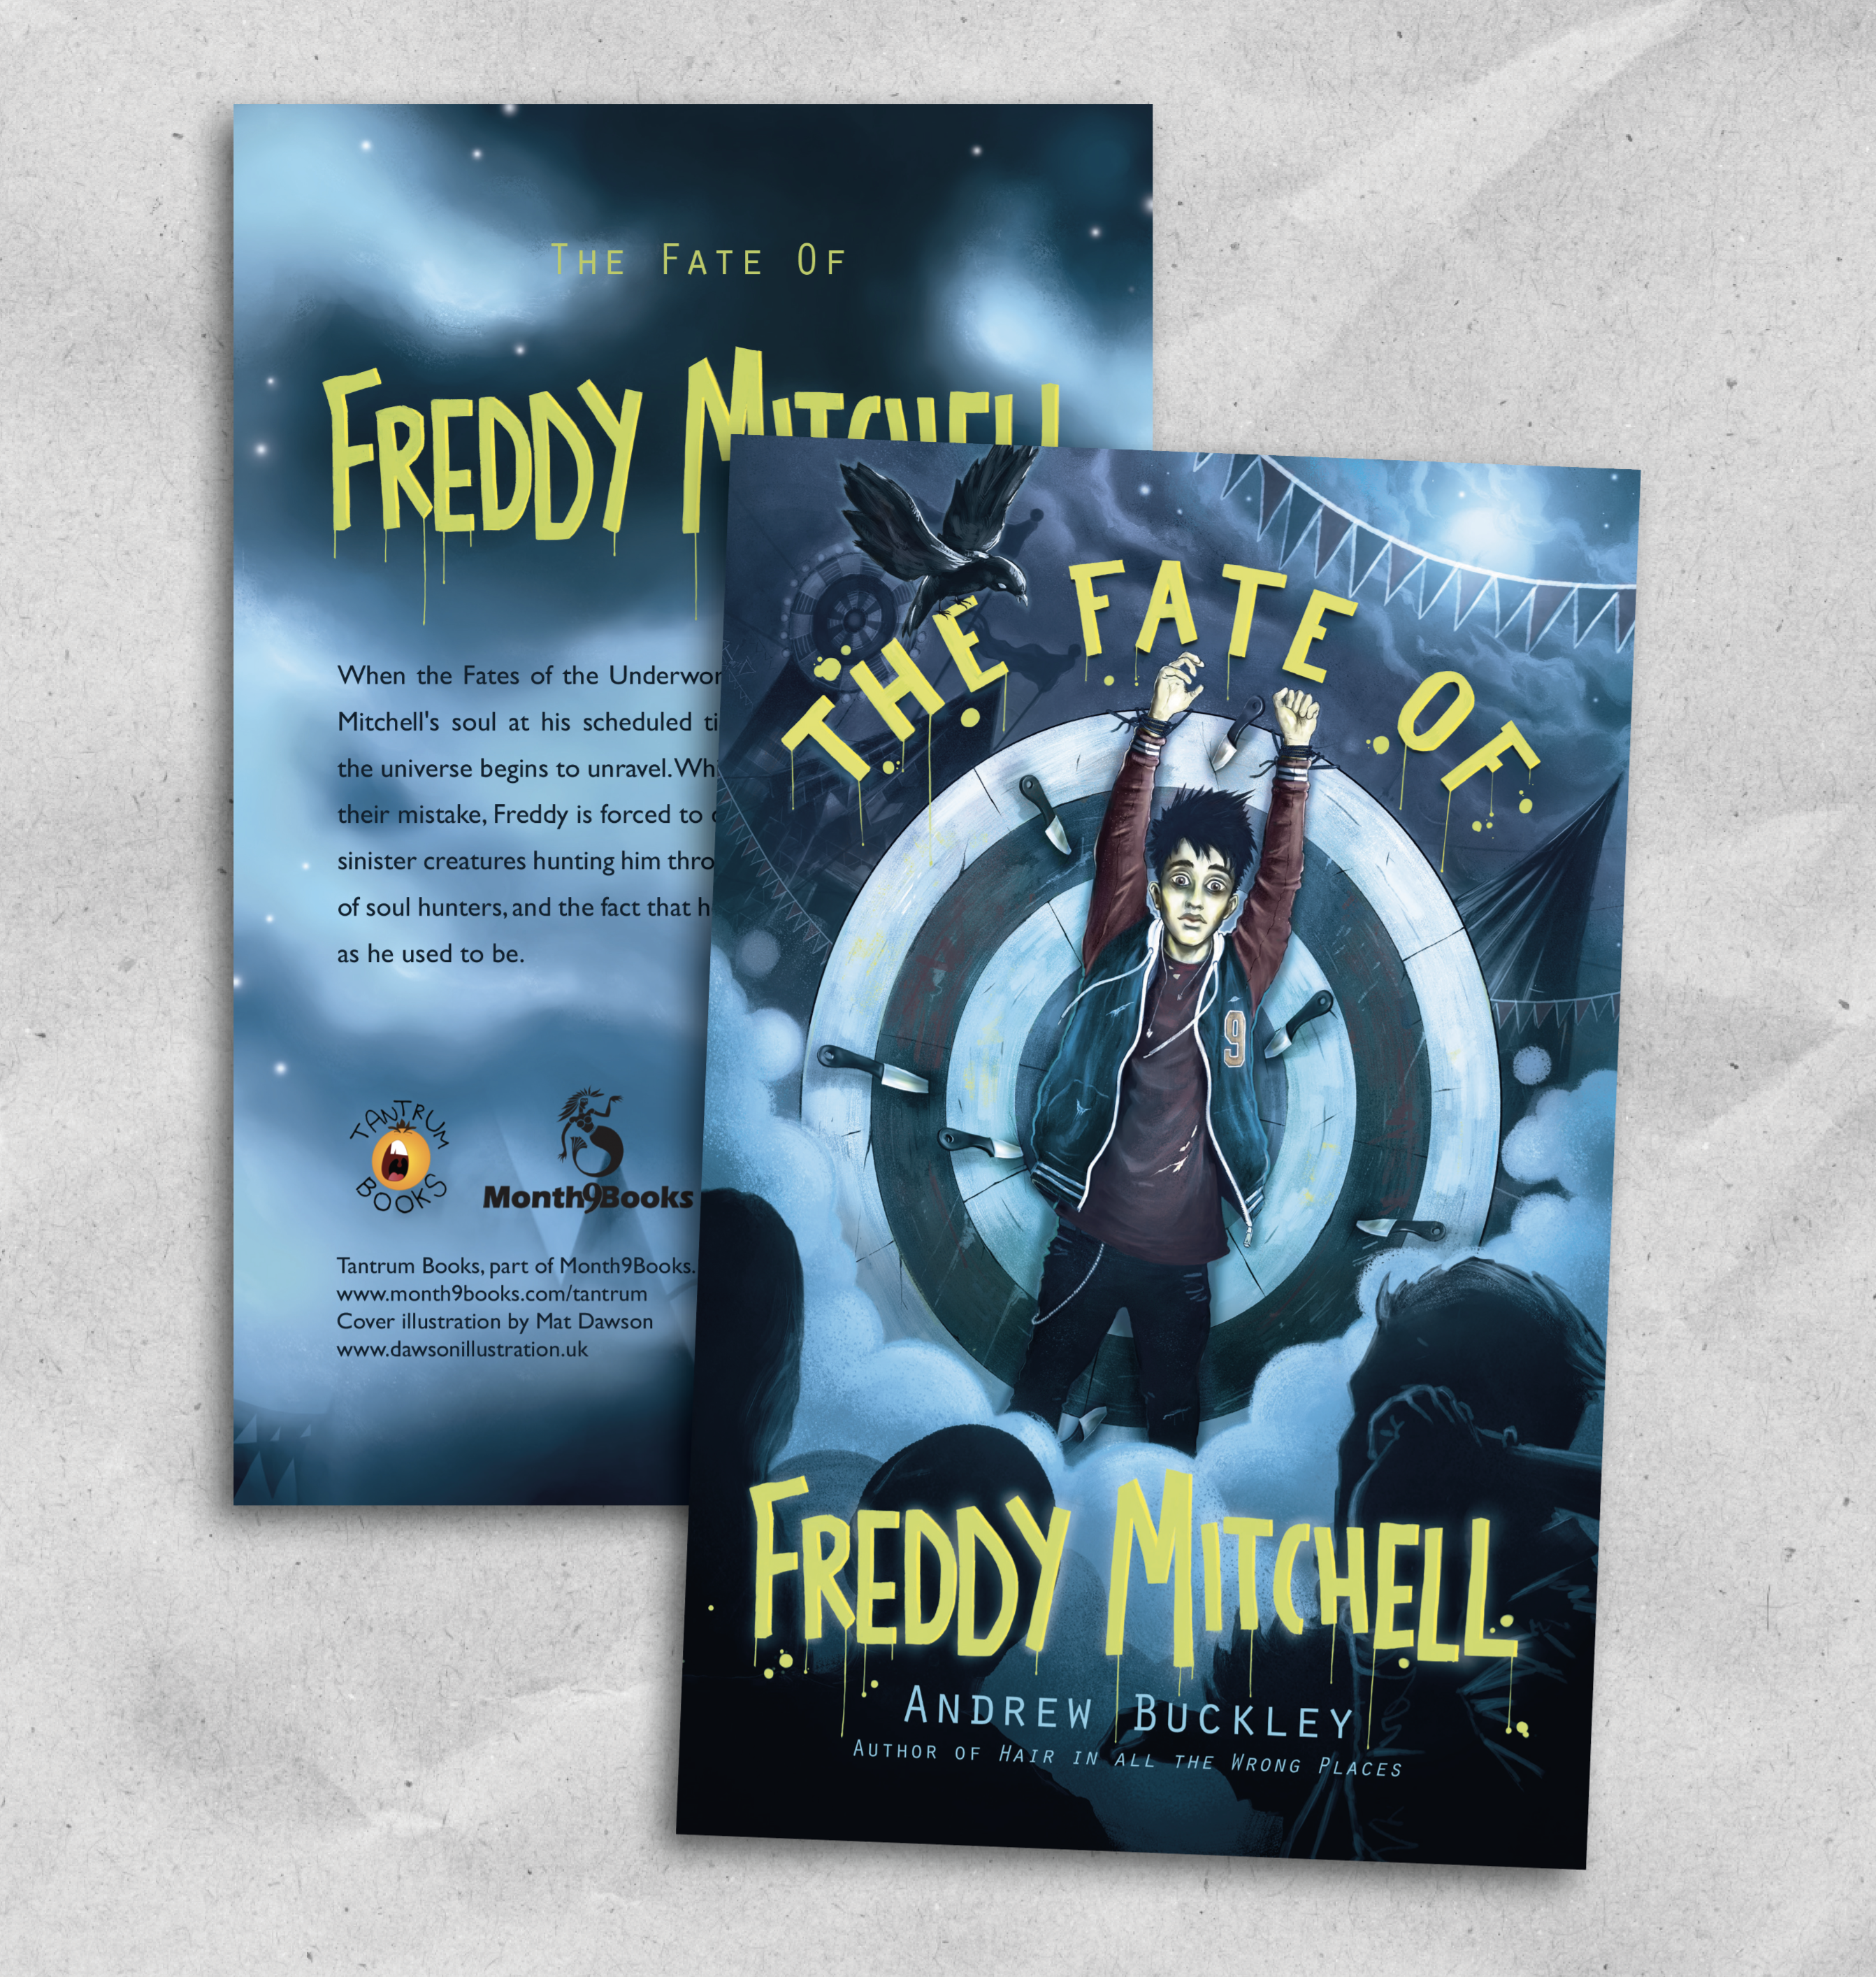 The Fate of Freddy Mitchell